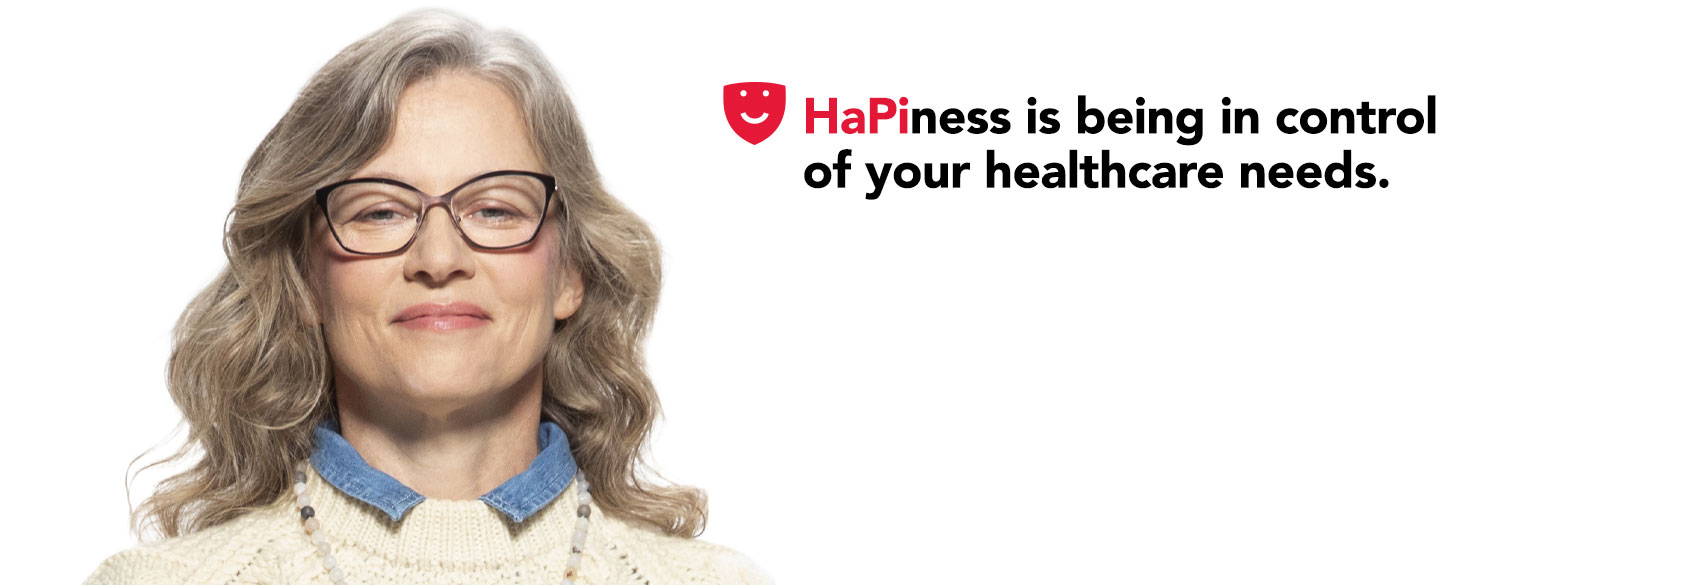 Hapiness is being in control of your healthcare needs